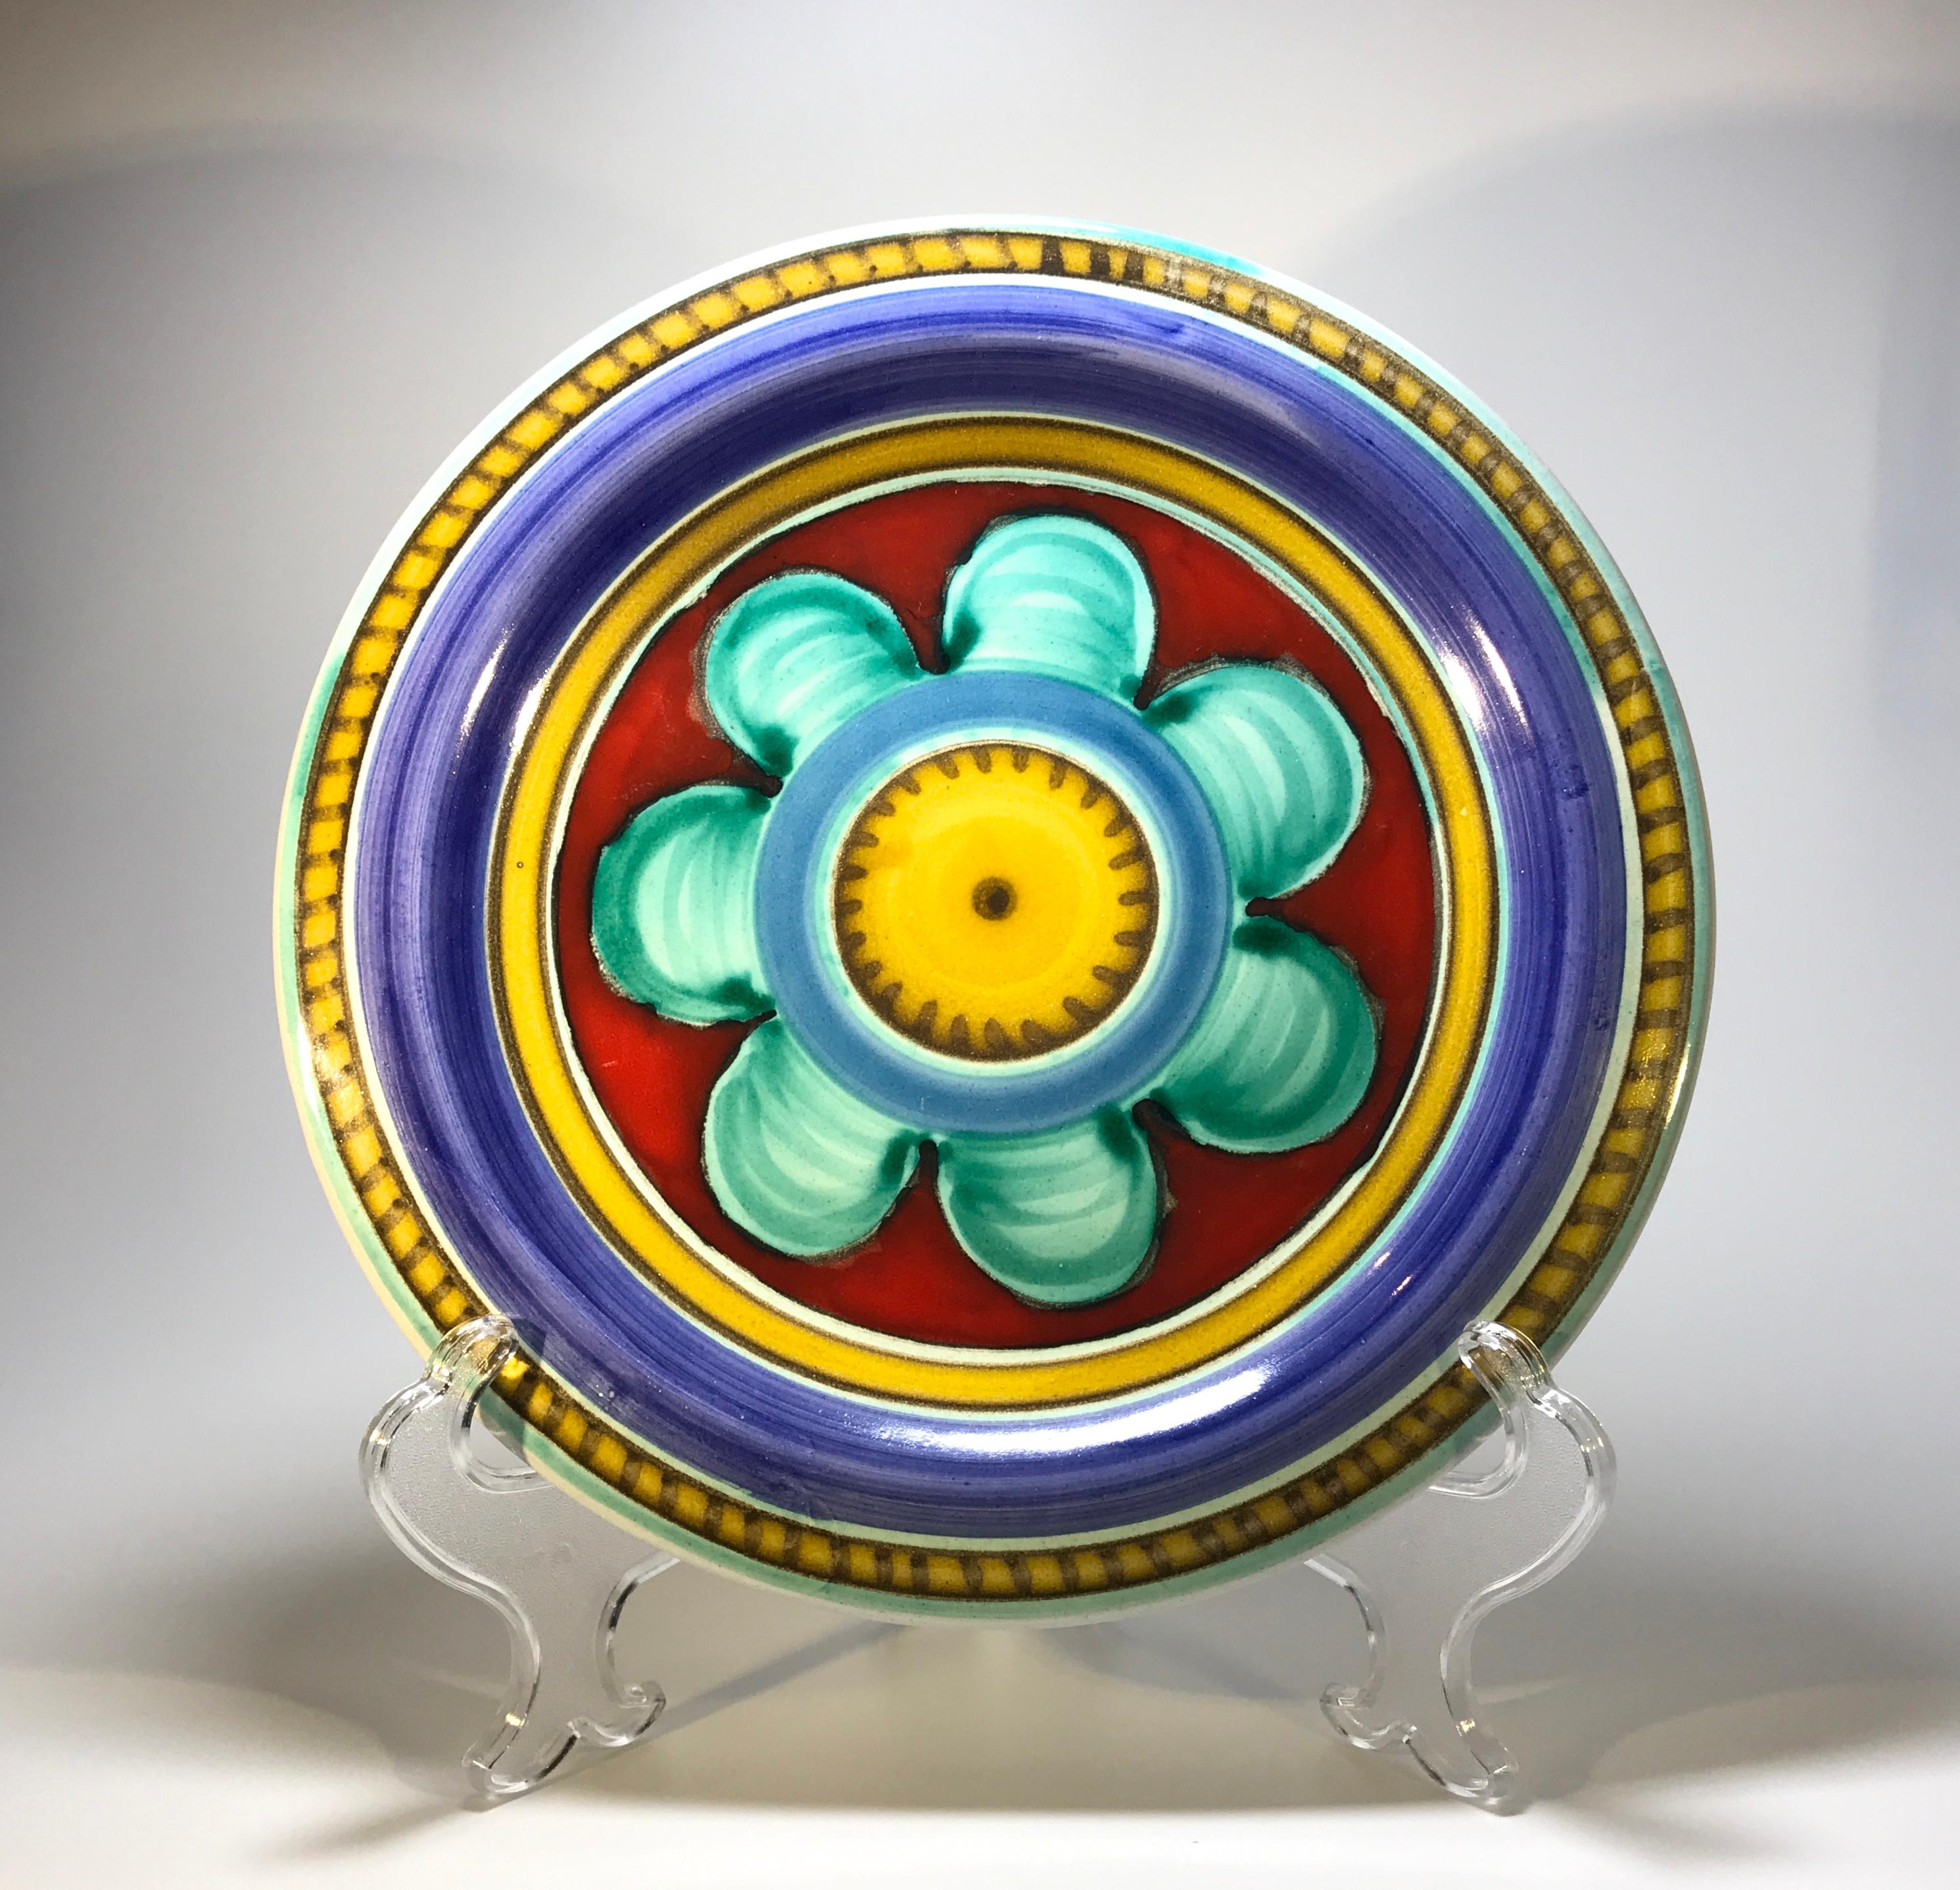 Colourful hand painted, large ceramic plate by DeSimone, Italy
Signed DeSimone, Italy to reverse,
circa 1960s
Measures: Height 1 inch, diameter 10 inch
In very good condition.